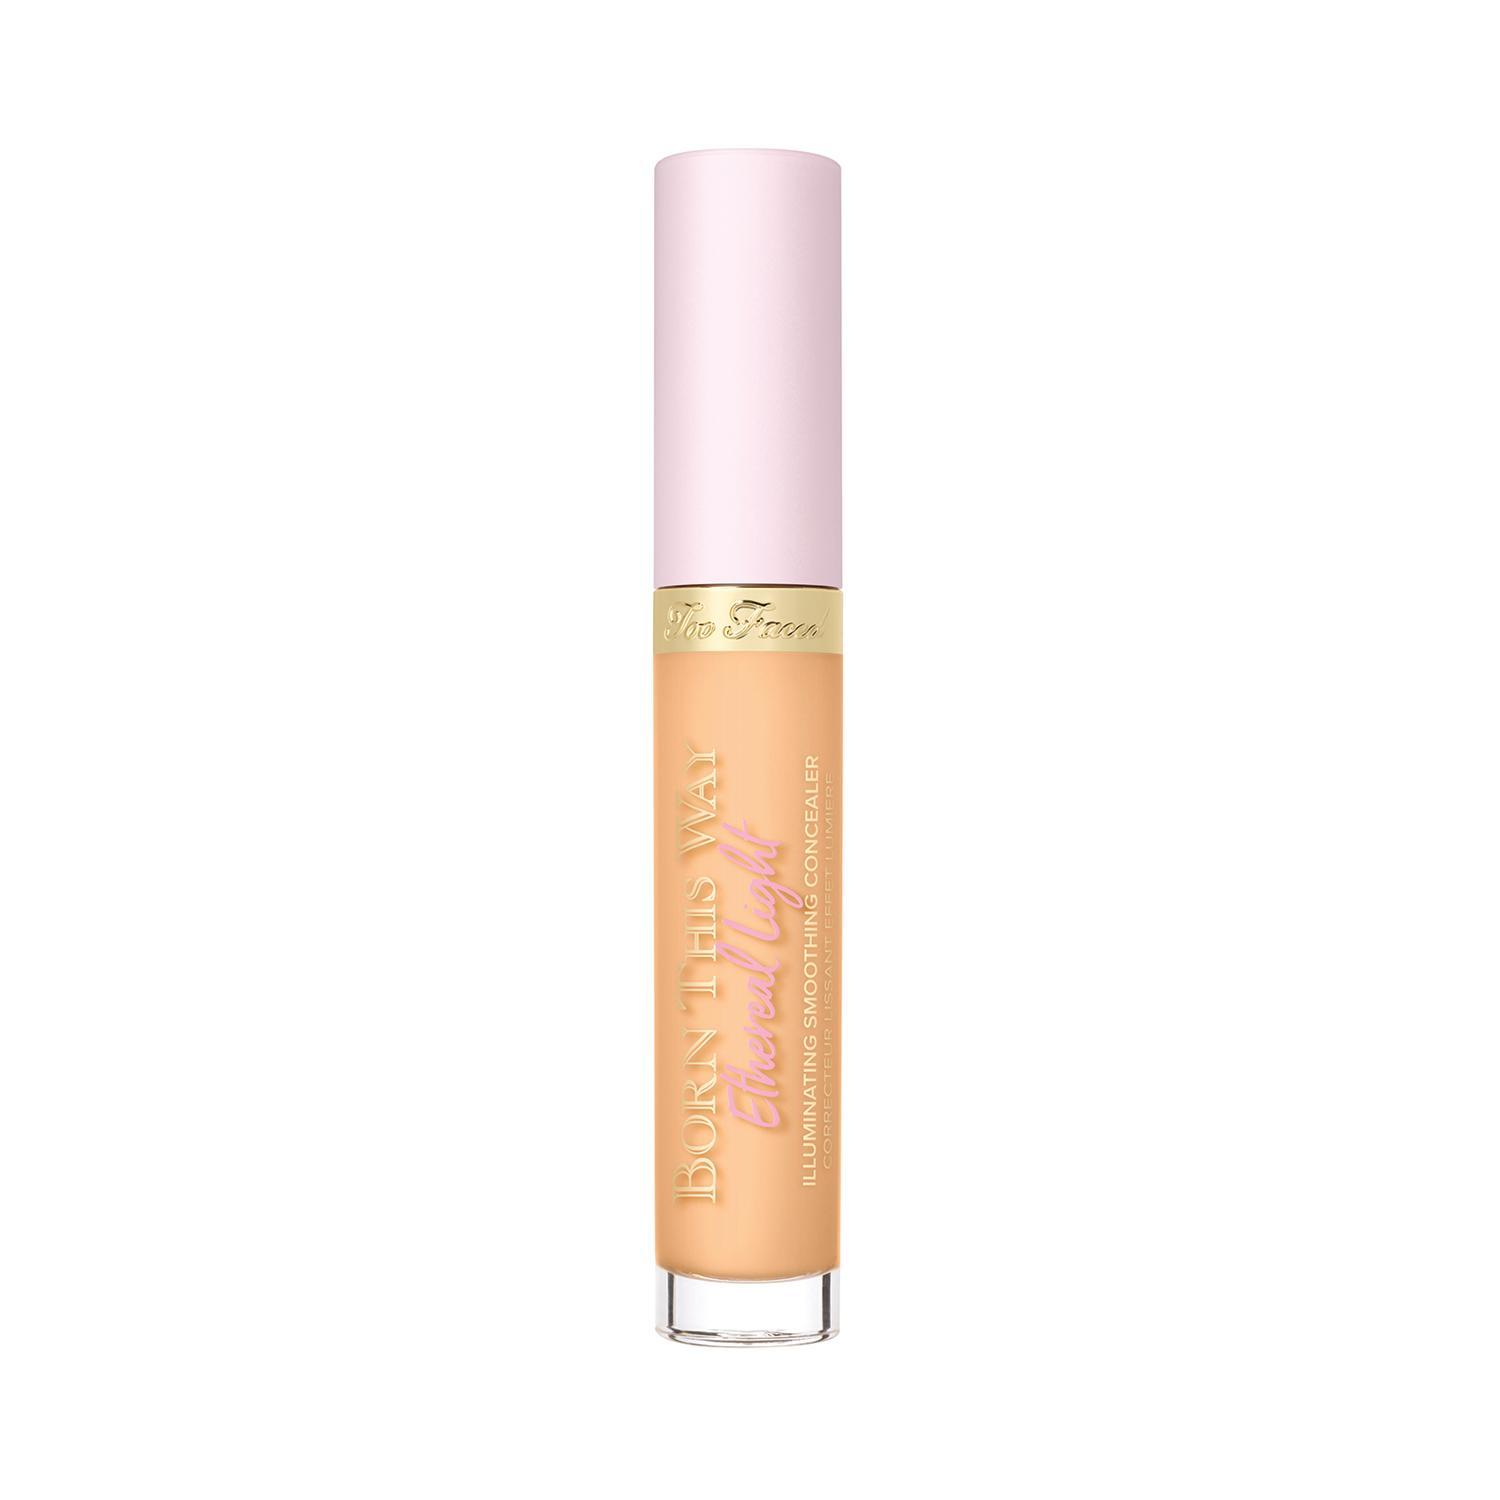 too faced born this way illuminating concealer - biscotti (5ml)